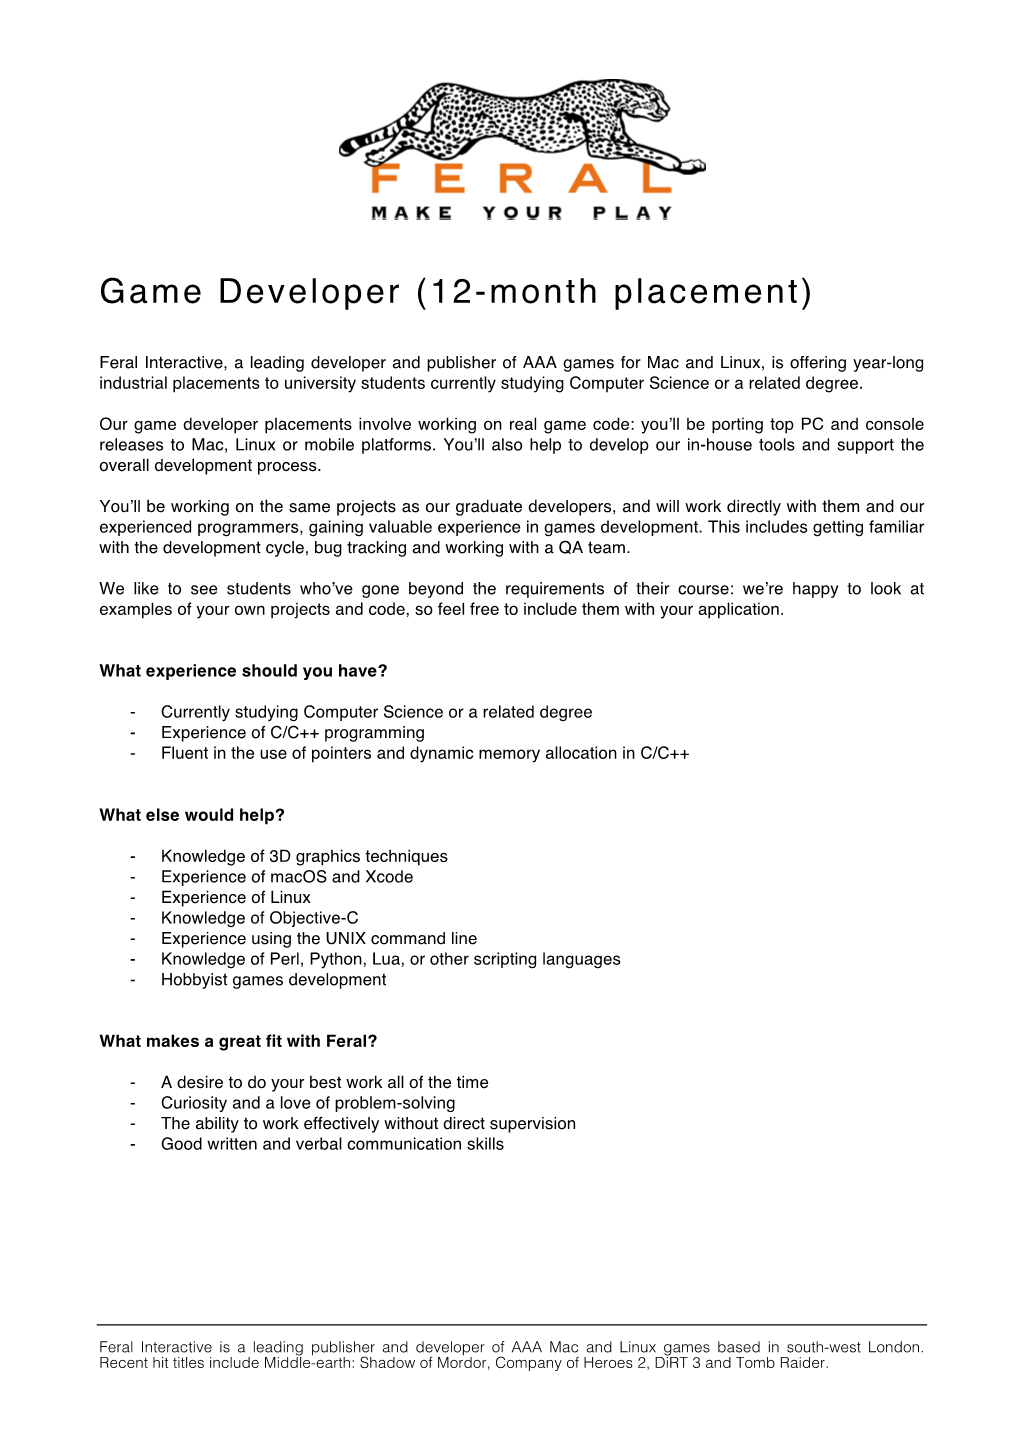 Game Developer (12-Month Placement)